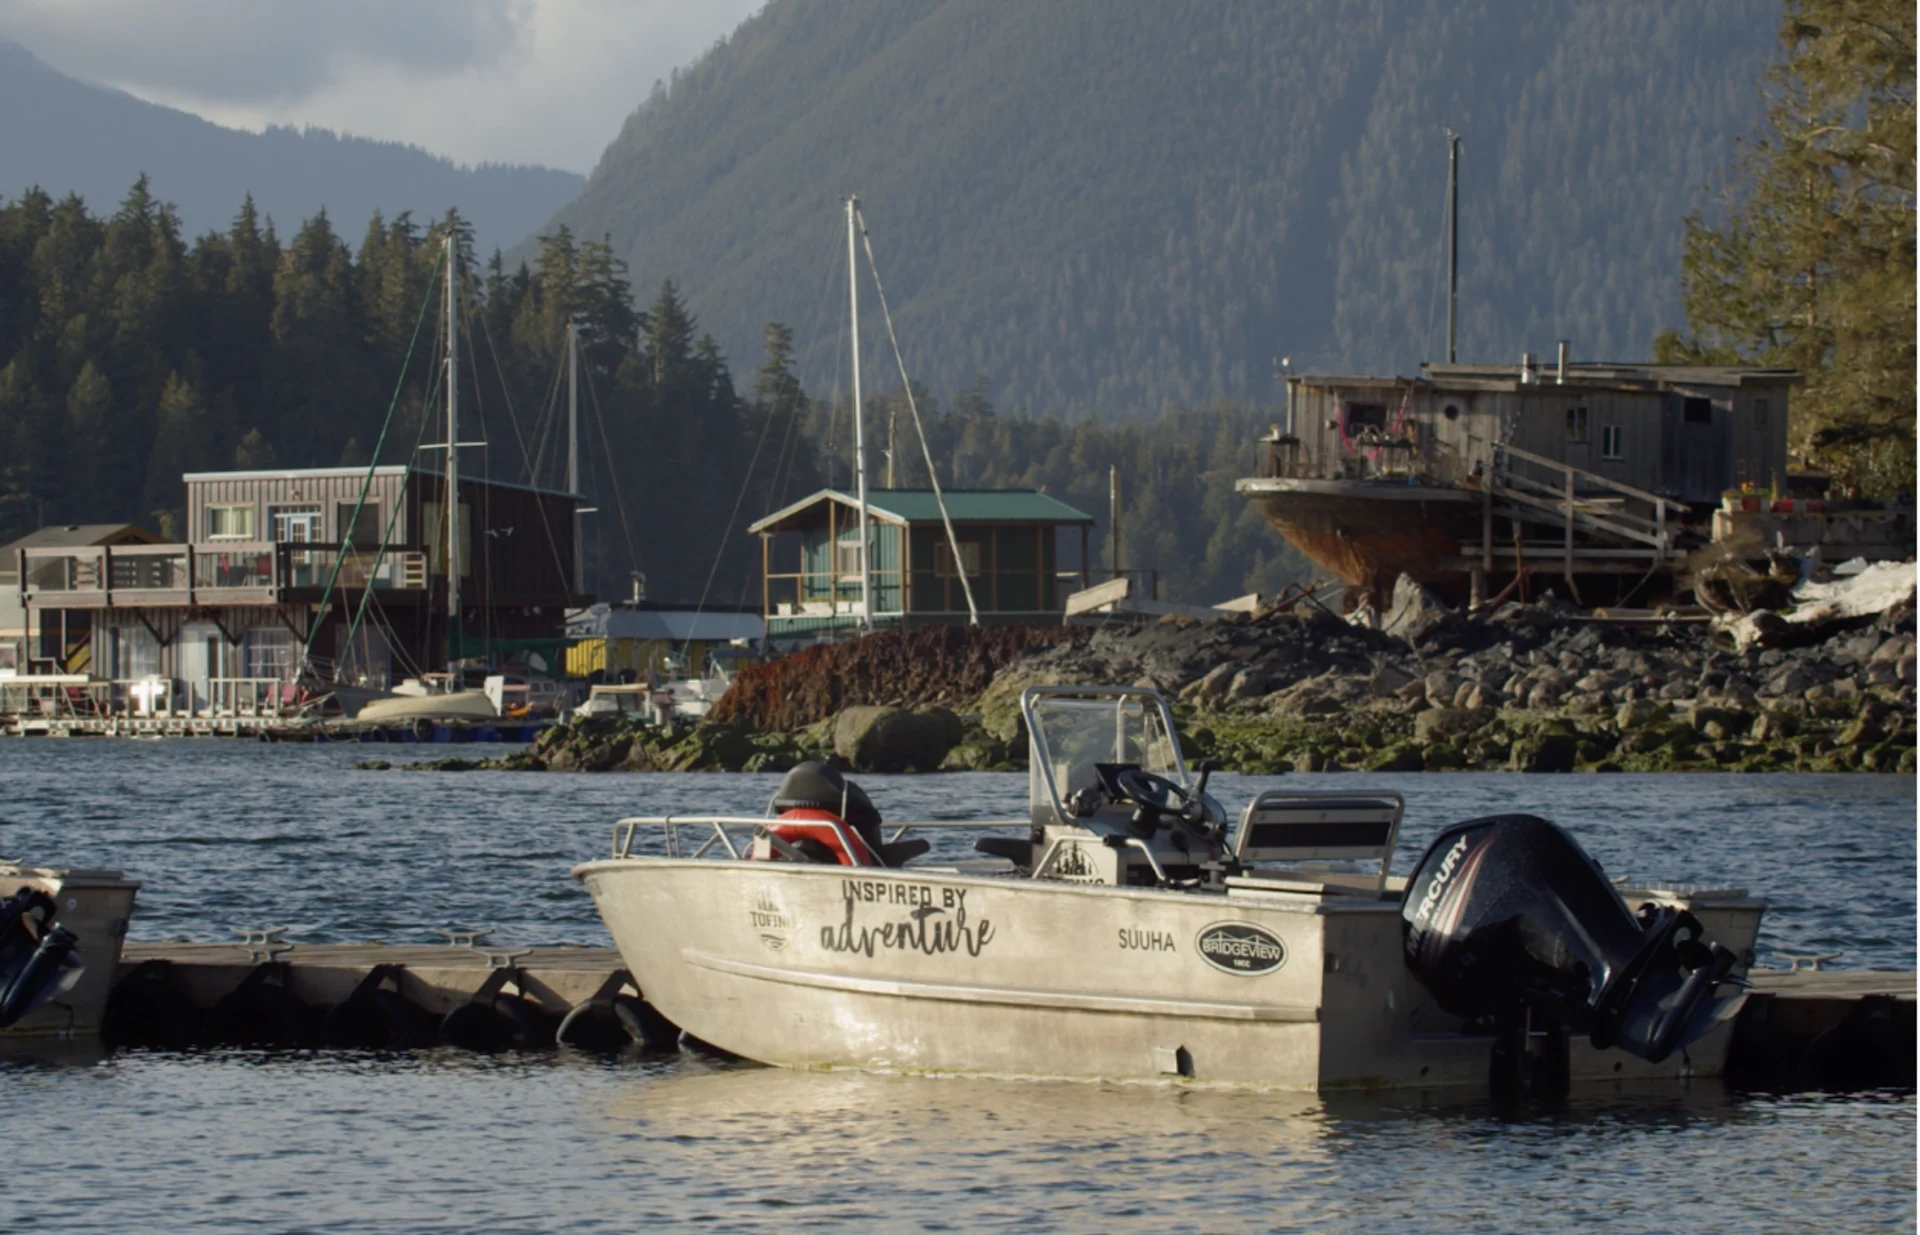 Looking for a staycation destination? Check out this little slice of heaven nestled in B.C.